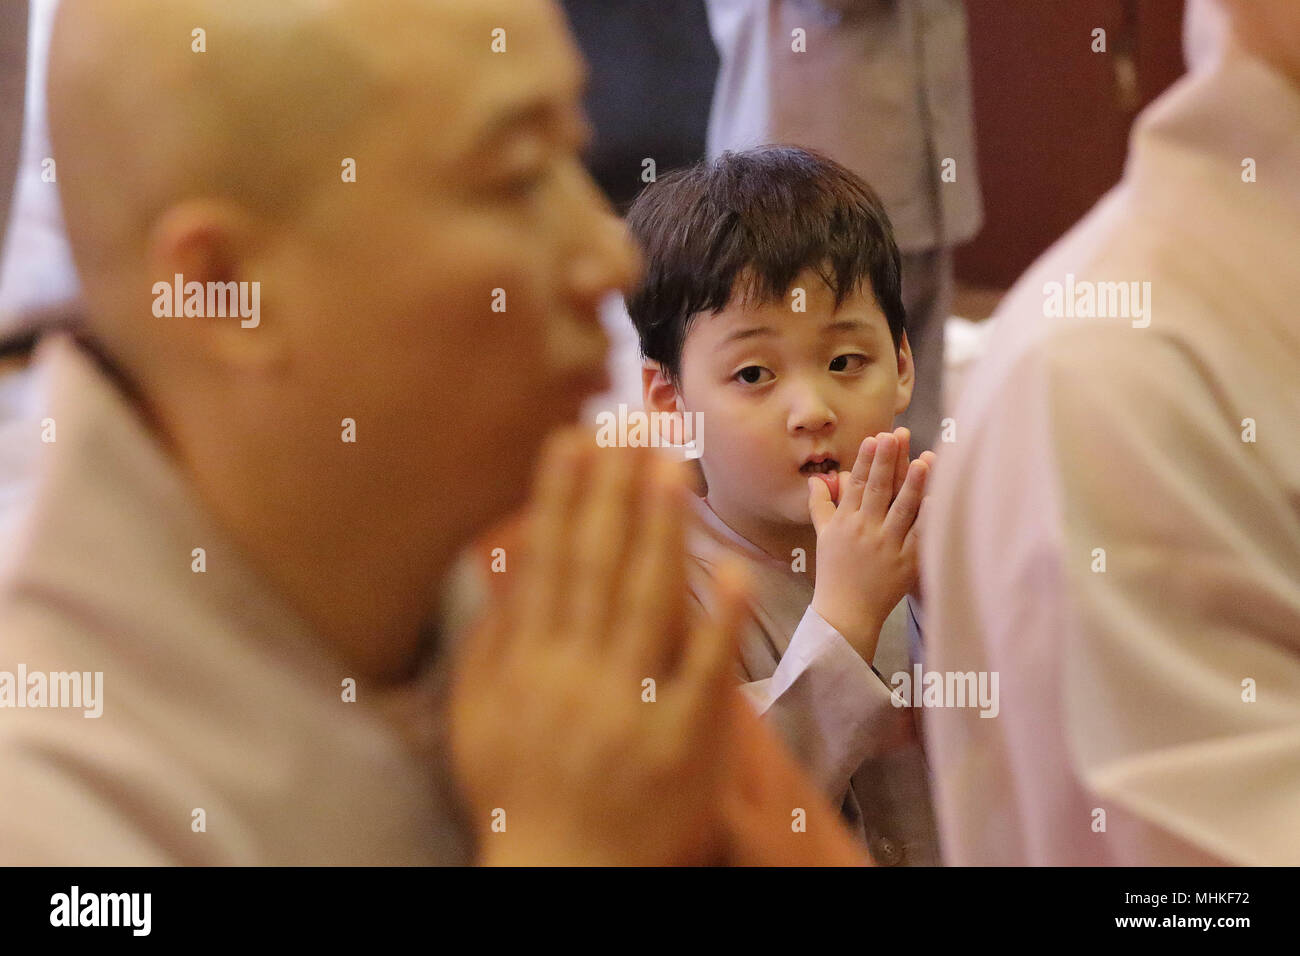 May 2, 2018 - Seoul, SOUTH KOREA - May 2, 2018-Seoul, South Korea-A child gets his head shaved by a Buddhist monk during the 'Children Becoming Buddhist Monks' ceremony forthcoming buddha's birthday at a Chogye temple in Seoul, South Korea. Children have their hair shaved off during the 'Children Becoming Buddhist Monks' ceremony ahead of buddha's birthday at a Chogye temple. The children will stay at the temple to learn about Buddhism for 20 days. Buddha was born approximately 2,562 years ago, and although the exact date is unknown, Buddha's official birthday is celebrated on the full moon in Stock Photo